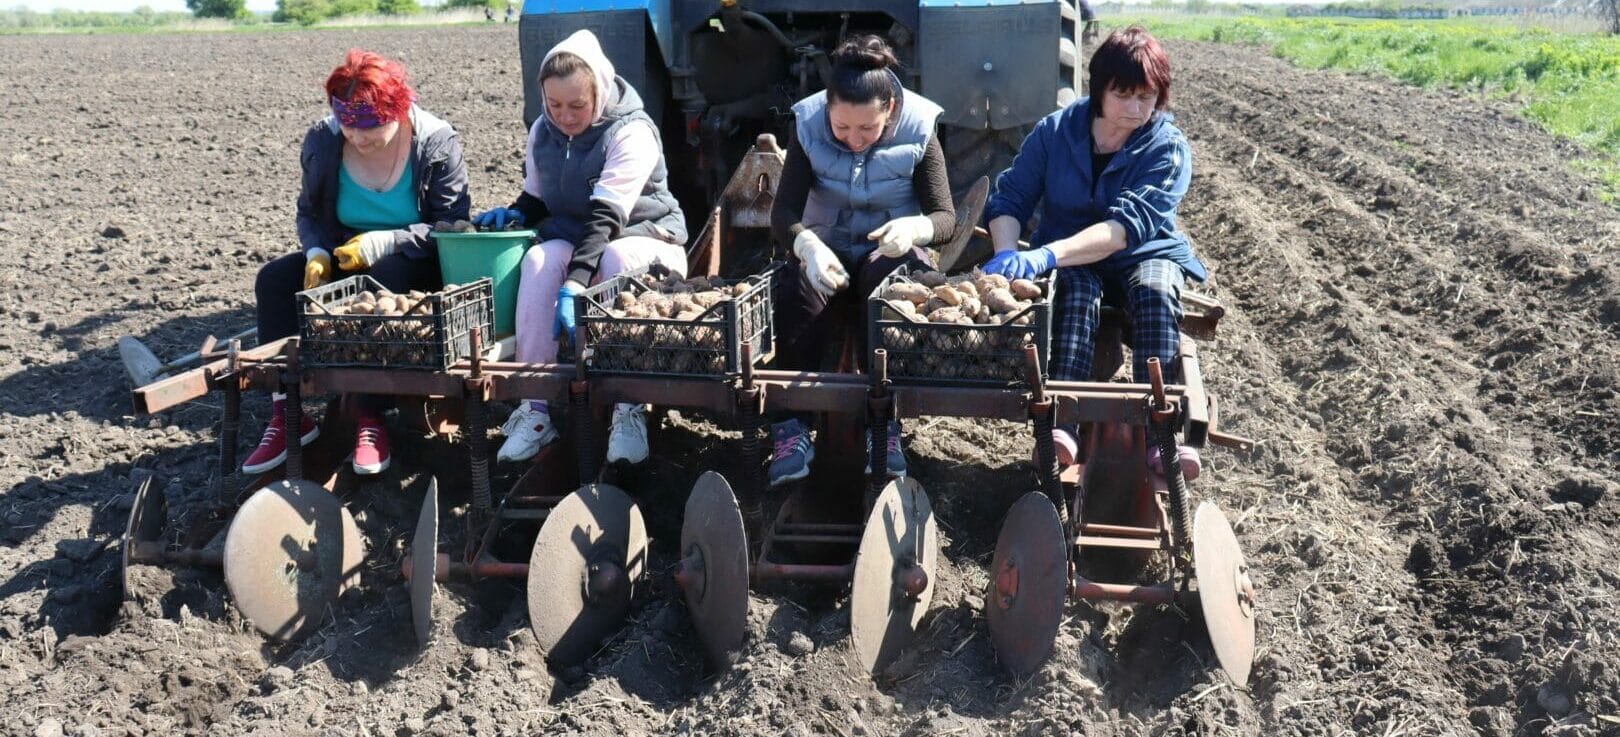 Employees of the executive committee planting potatoes in the public garden